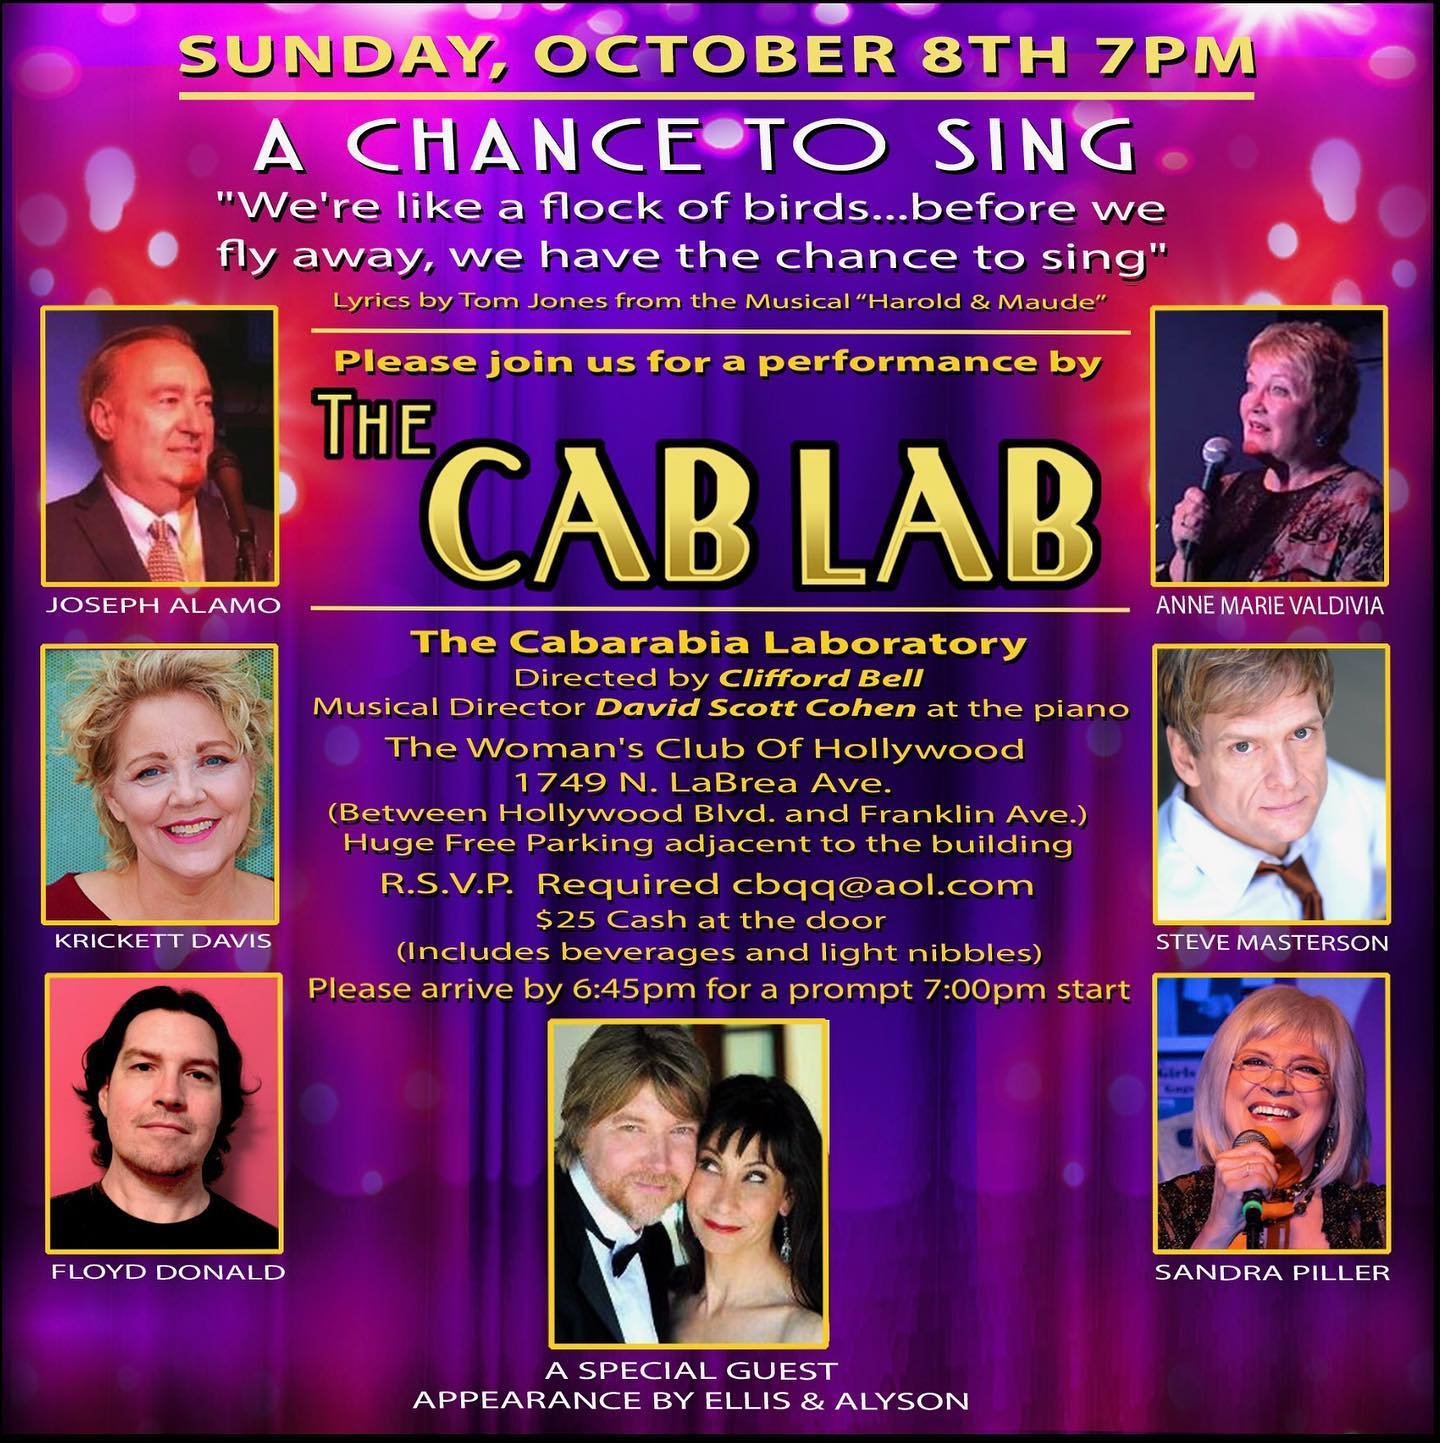 CAB LAB A CHANCE TO SING 3 OCT. 8.jpg